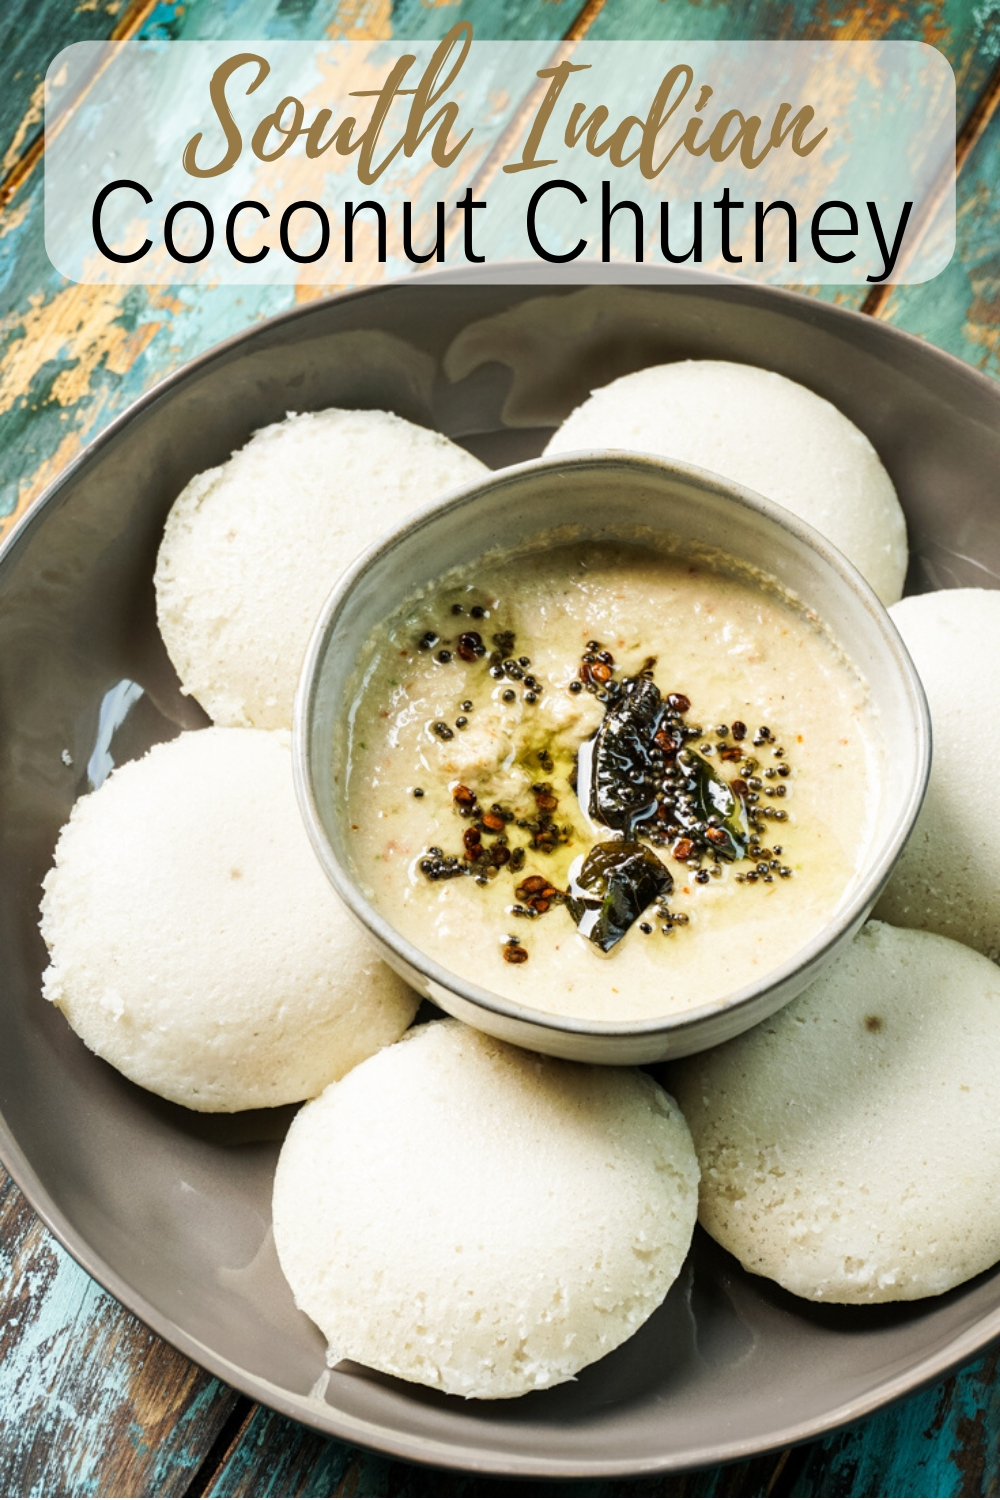 South Indian Coconut Chutney - Cooking Curries